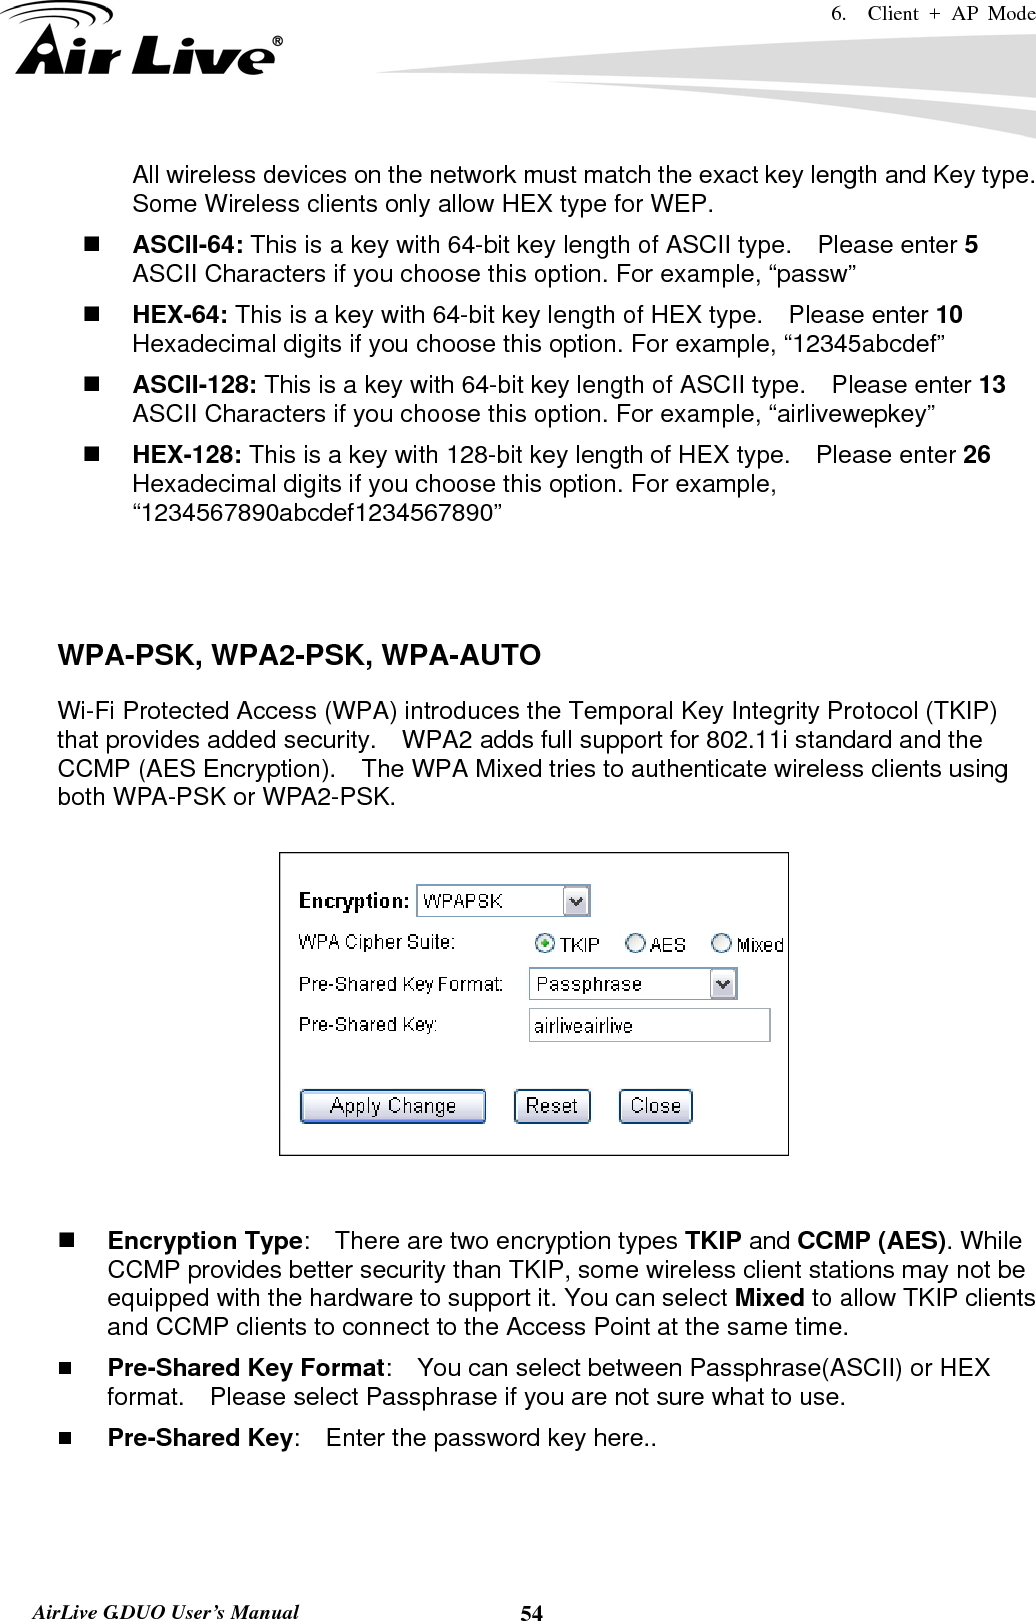 6.  Client + AP Mode   AirLive G.DUO User’s Manual  54All wireless devices on the network must match the exact key length and Key type.   Some Wireless clients only allow HEX type for WEP.  ASCII-64: This is a key with 64-bit key length of ASCII type.    Please enter 5 ASCII Characters if you choose this option. For example, “passw”  HEX-64: This is a key with 64-bit key length of HEX type.    Please enter 10 Hexadecimal digits if you choose this option. For example, “12345abcdef”  ASCII-128: This is a key with 64-bit key length of ASCII type.    Please enter 13 ASCII Characters if you choose this option. For example, “airlivewepkey”  HEX-128: This is a key with 128-bit key length of HEX type.    Please enter 26 Hexadecimal digits if you choose this option. For example, “1234567890abcdef1234567890”    WPA-PSK, WPA2-PSK, WPA-AUTO Wi-Fi Protected Access (WPA) introduces the Temporal Key Integrity Protocol (TKIP) that provides added security.    WPA2 adds full support for 802.11i standard and the CCMP (AES Encryption).    The WPA Mixed tries to authenticate wireless clients using both WPA-PSK or WPA2-PSK.          Encryption Type:    There are two encryption types TKIP and CCMP (AES). While CCMP provides better security than TKIP, some wireless client stations may not be equipped with the hardware to support it. You can select Mixed to allow TKIP clients and CCMP clients to connect to the Access Point at the same time.    Pre-Shared Key Format:    You can select between Passphrase(ASCII) or HEX format.    Please select Passphrase if you are not sure what to use.  Pre-Shared Key:    Enter the password key here..  